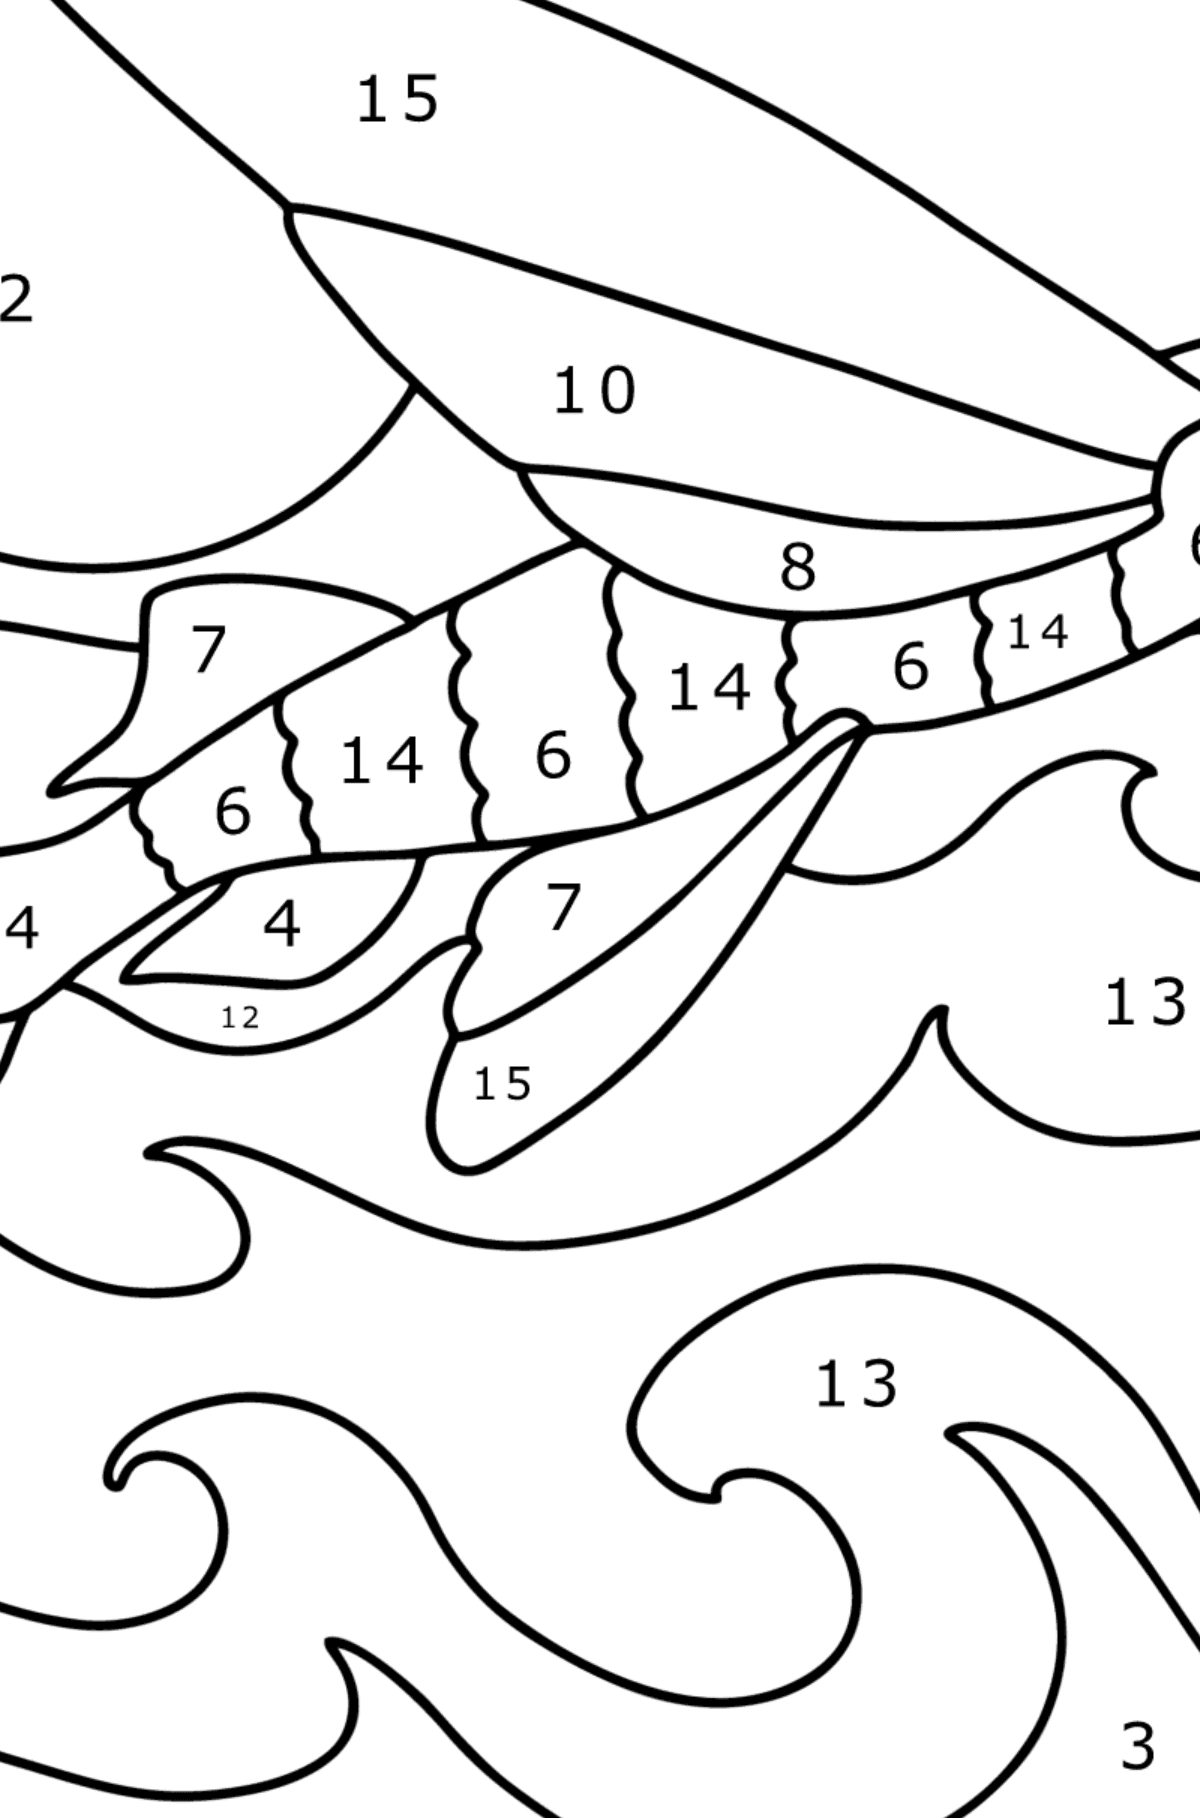 Flying fish coloring page - Coloring by Numbers for Kids